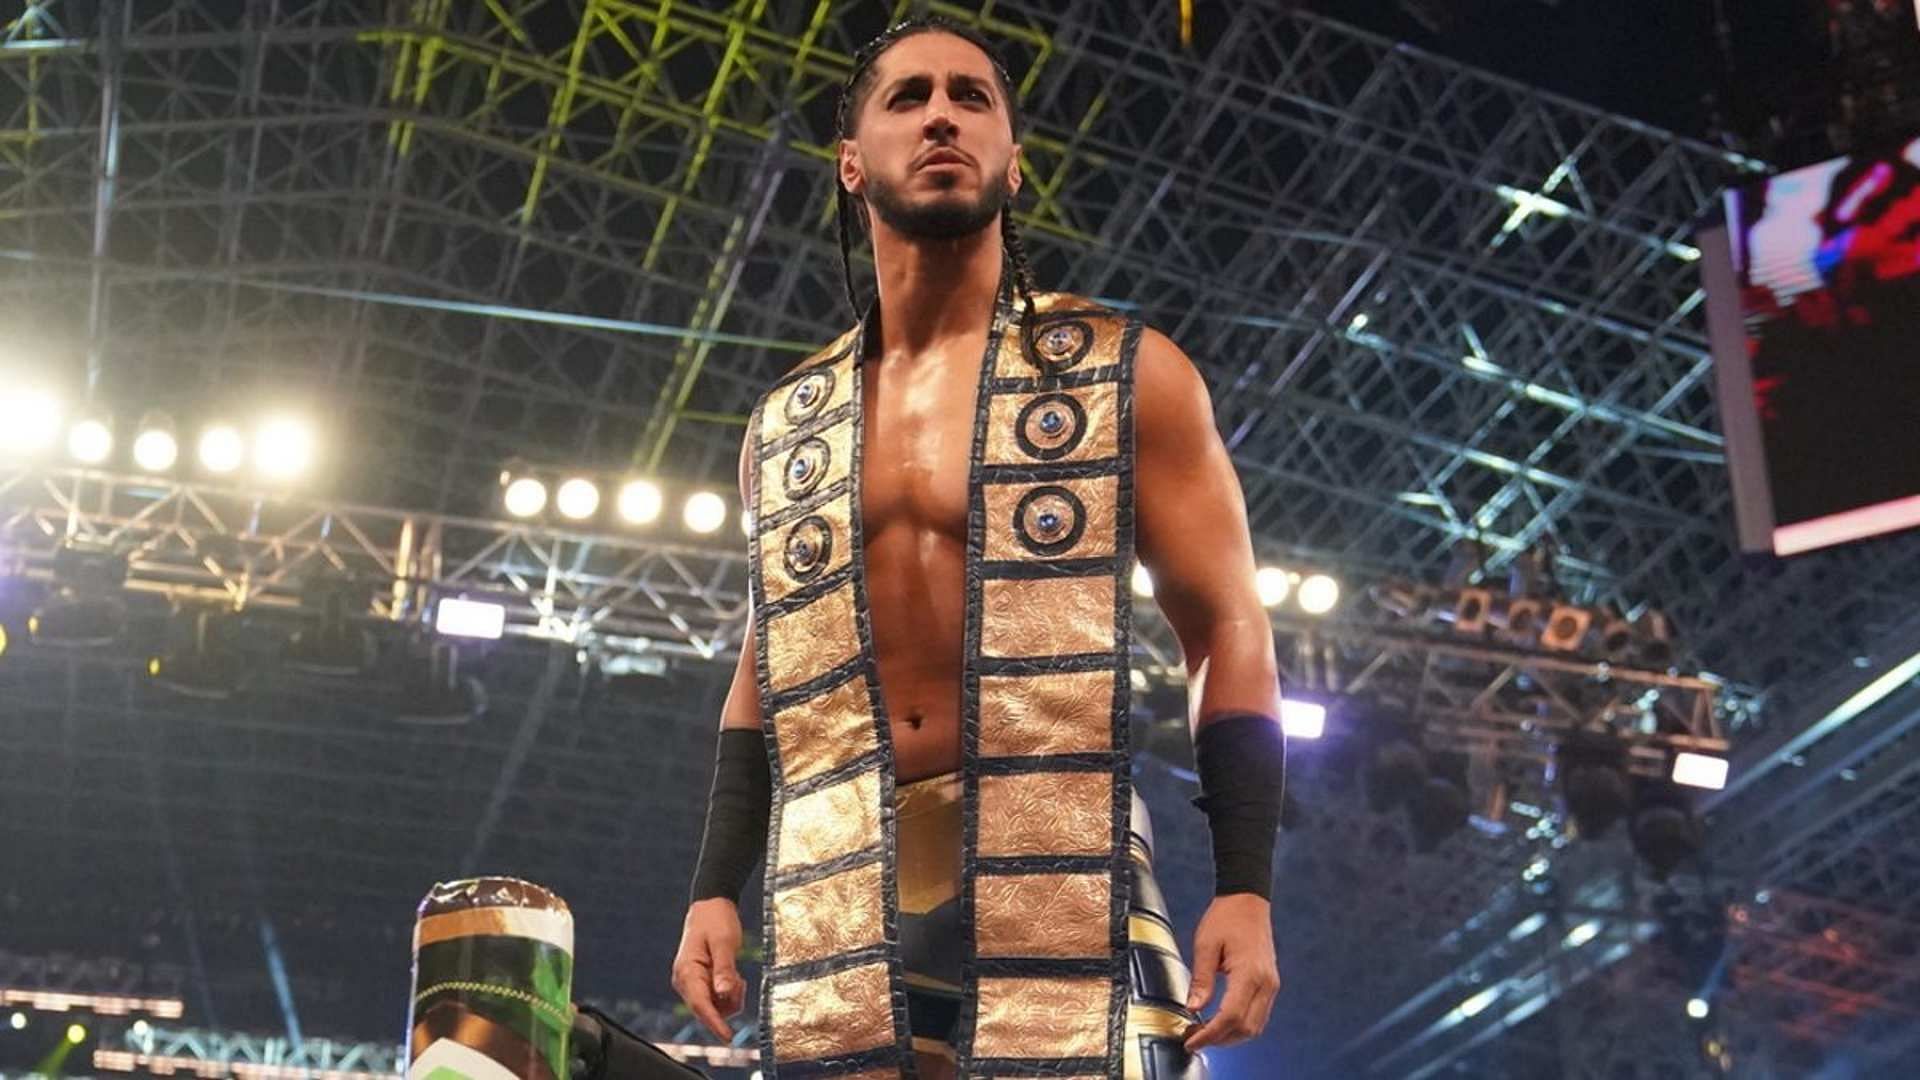 Mustafa Ali is currently competing as part of WWE